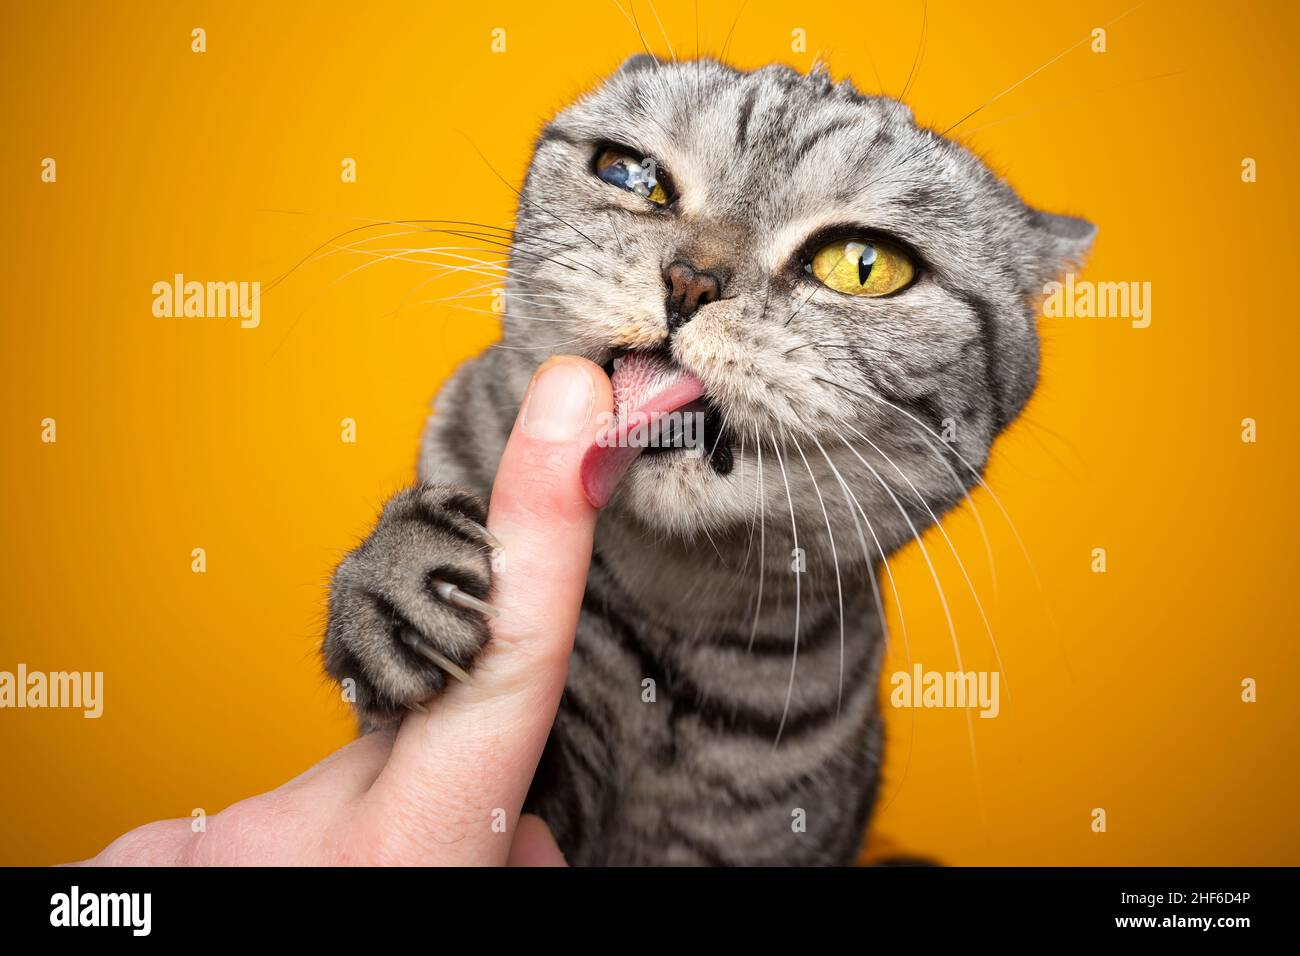 hungry silver tabby british shorthair cat licking creamy snack off human finger making funny face Stock Photo